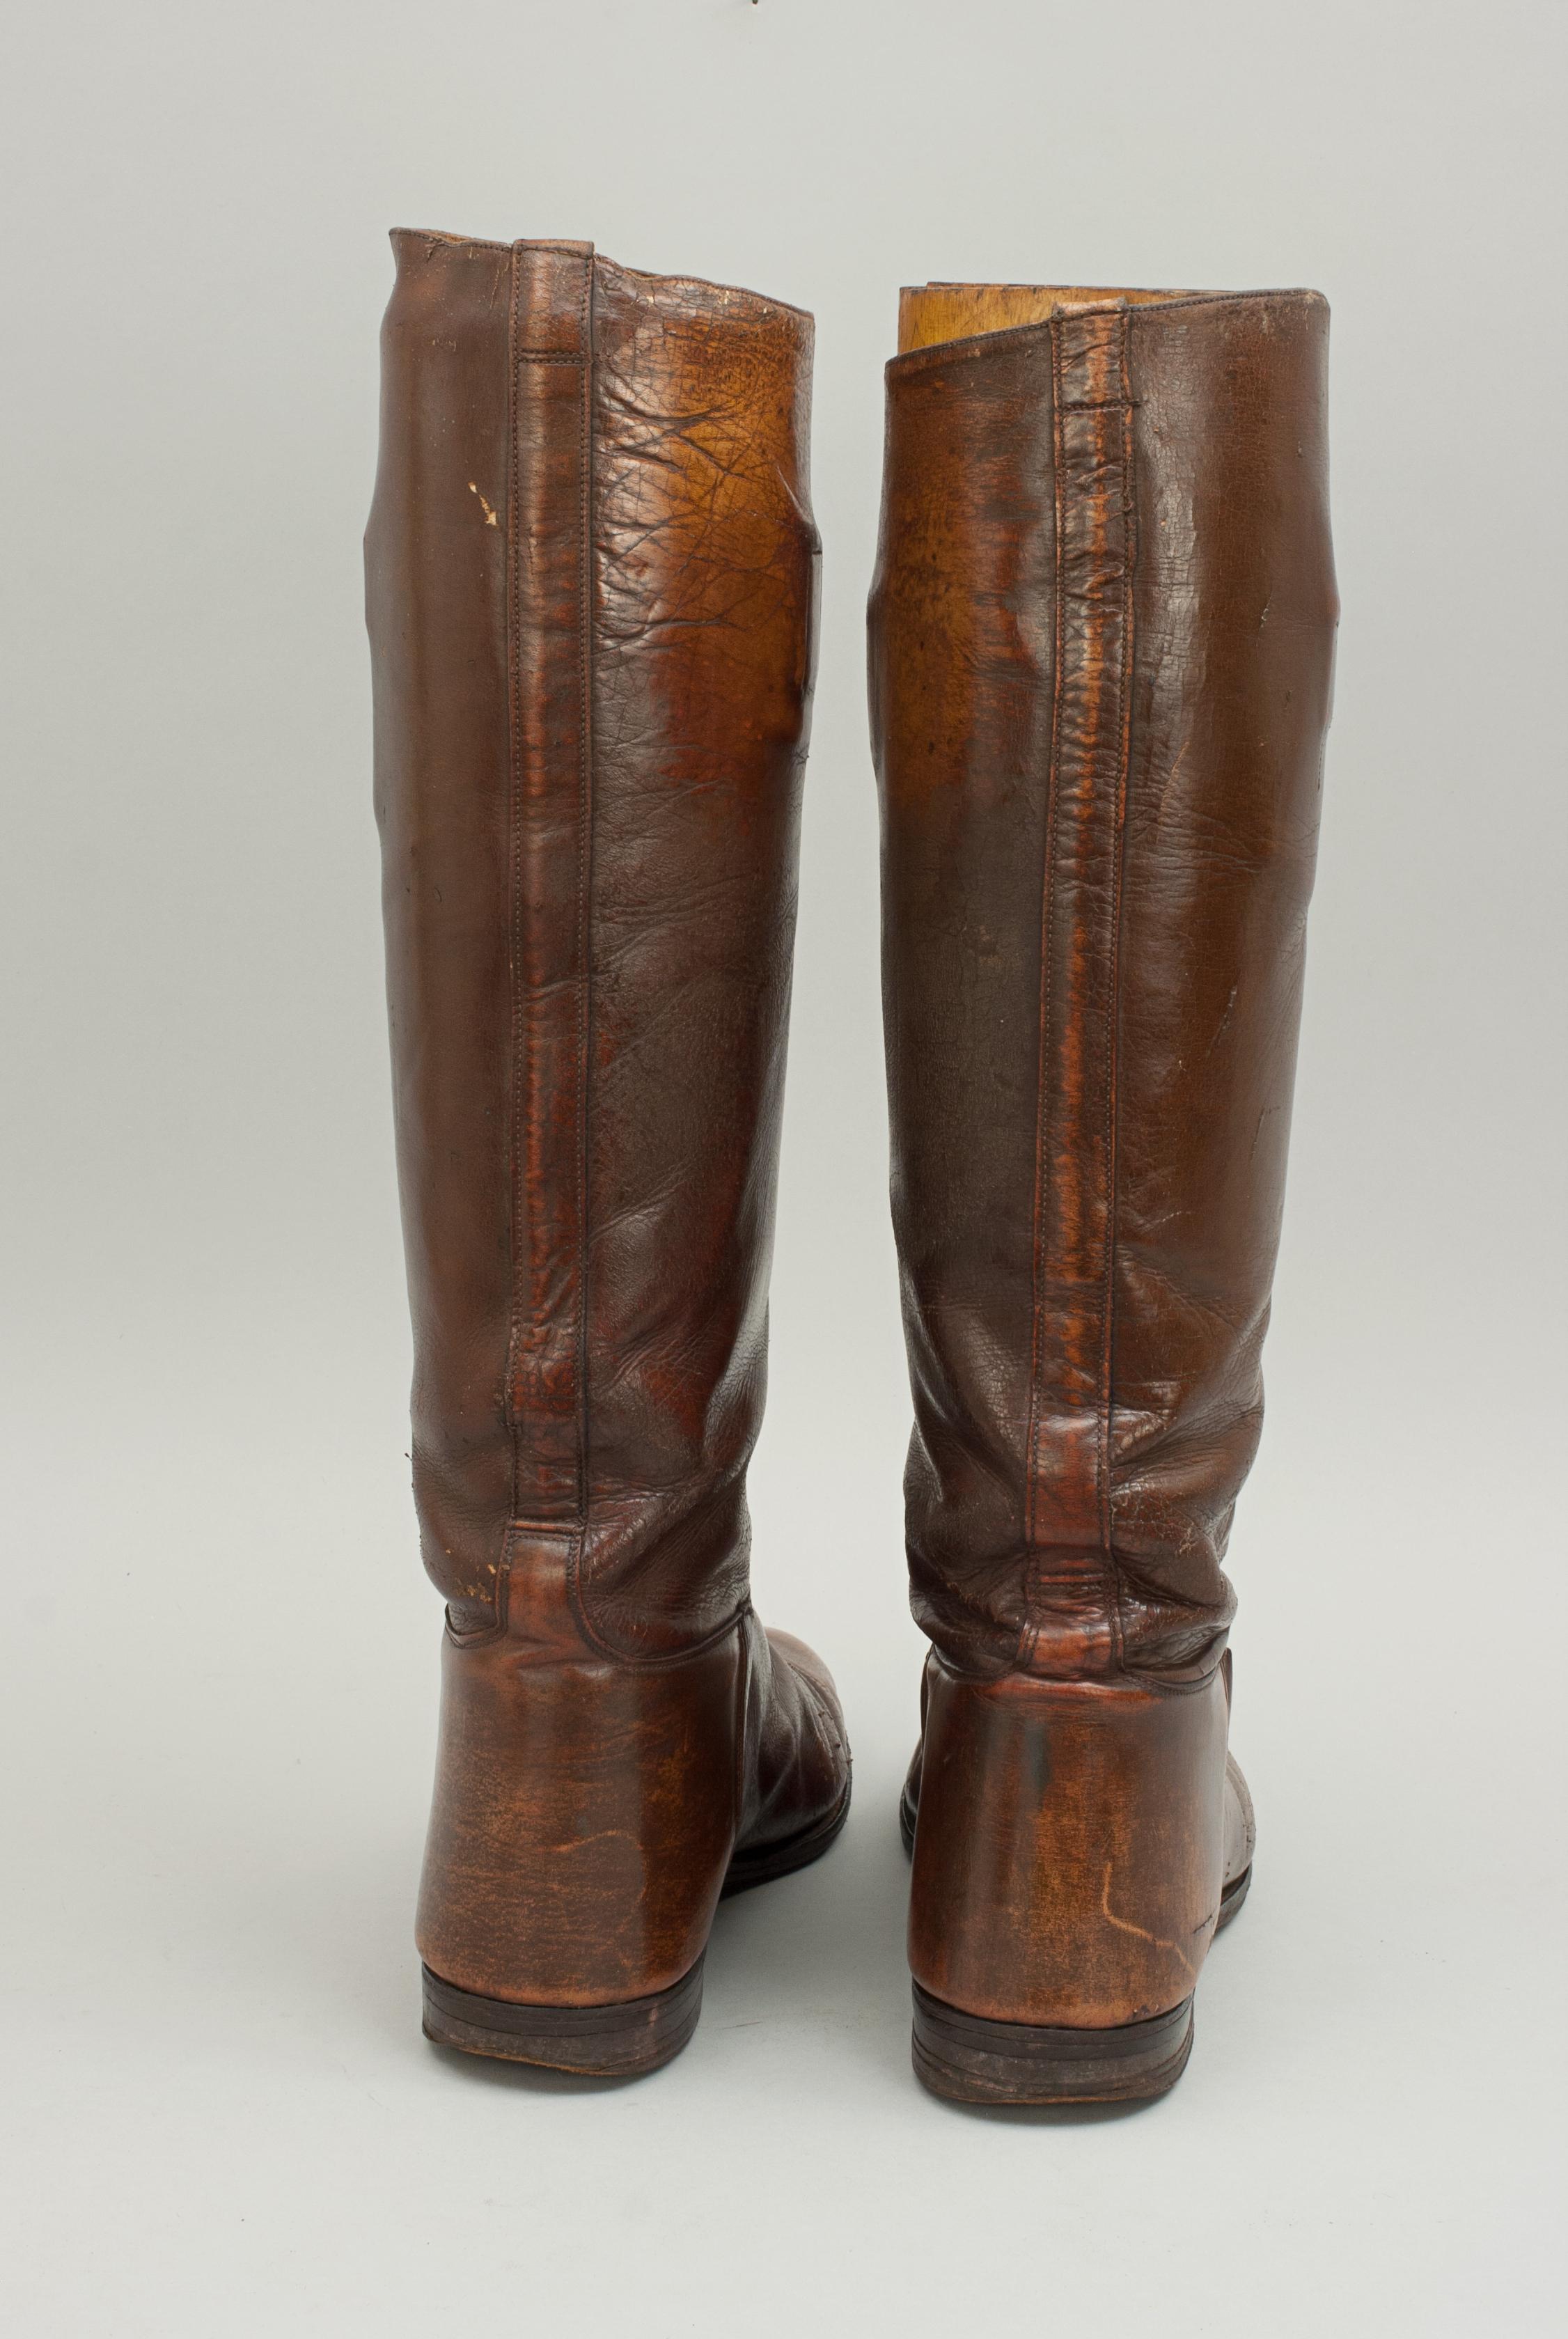 Sporting Art Vintage Brown Leather Riding Boots